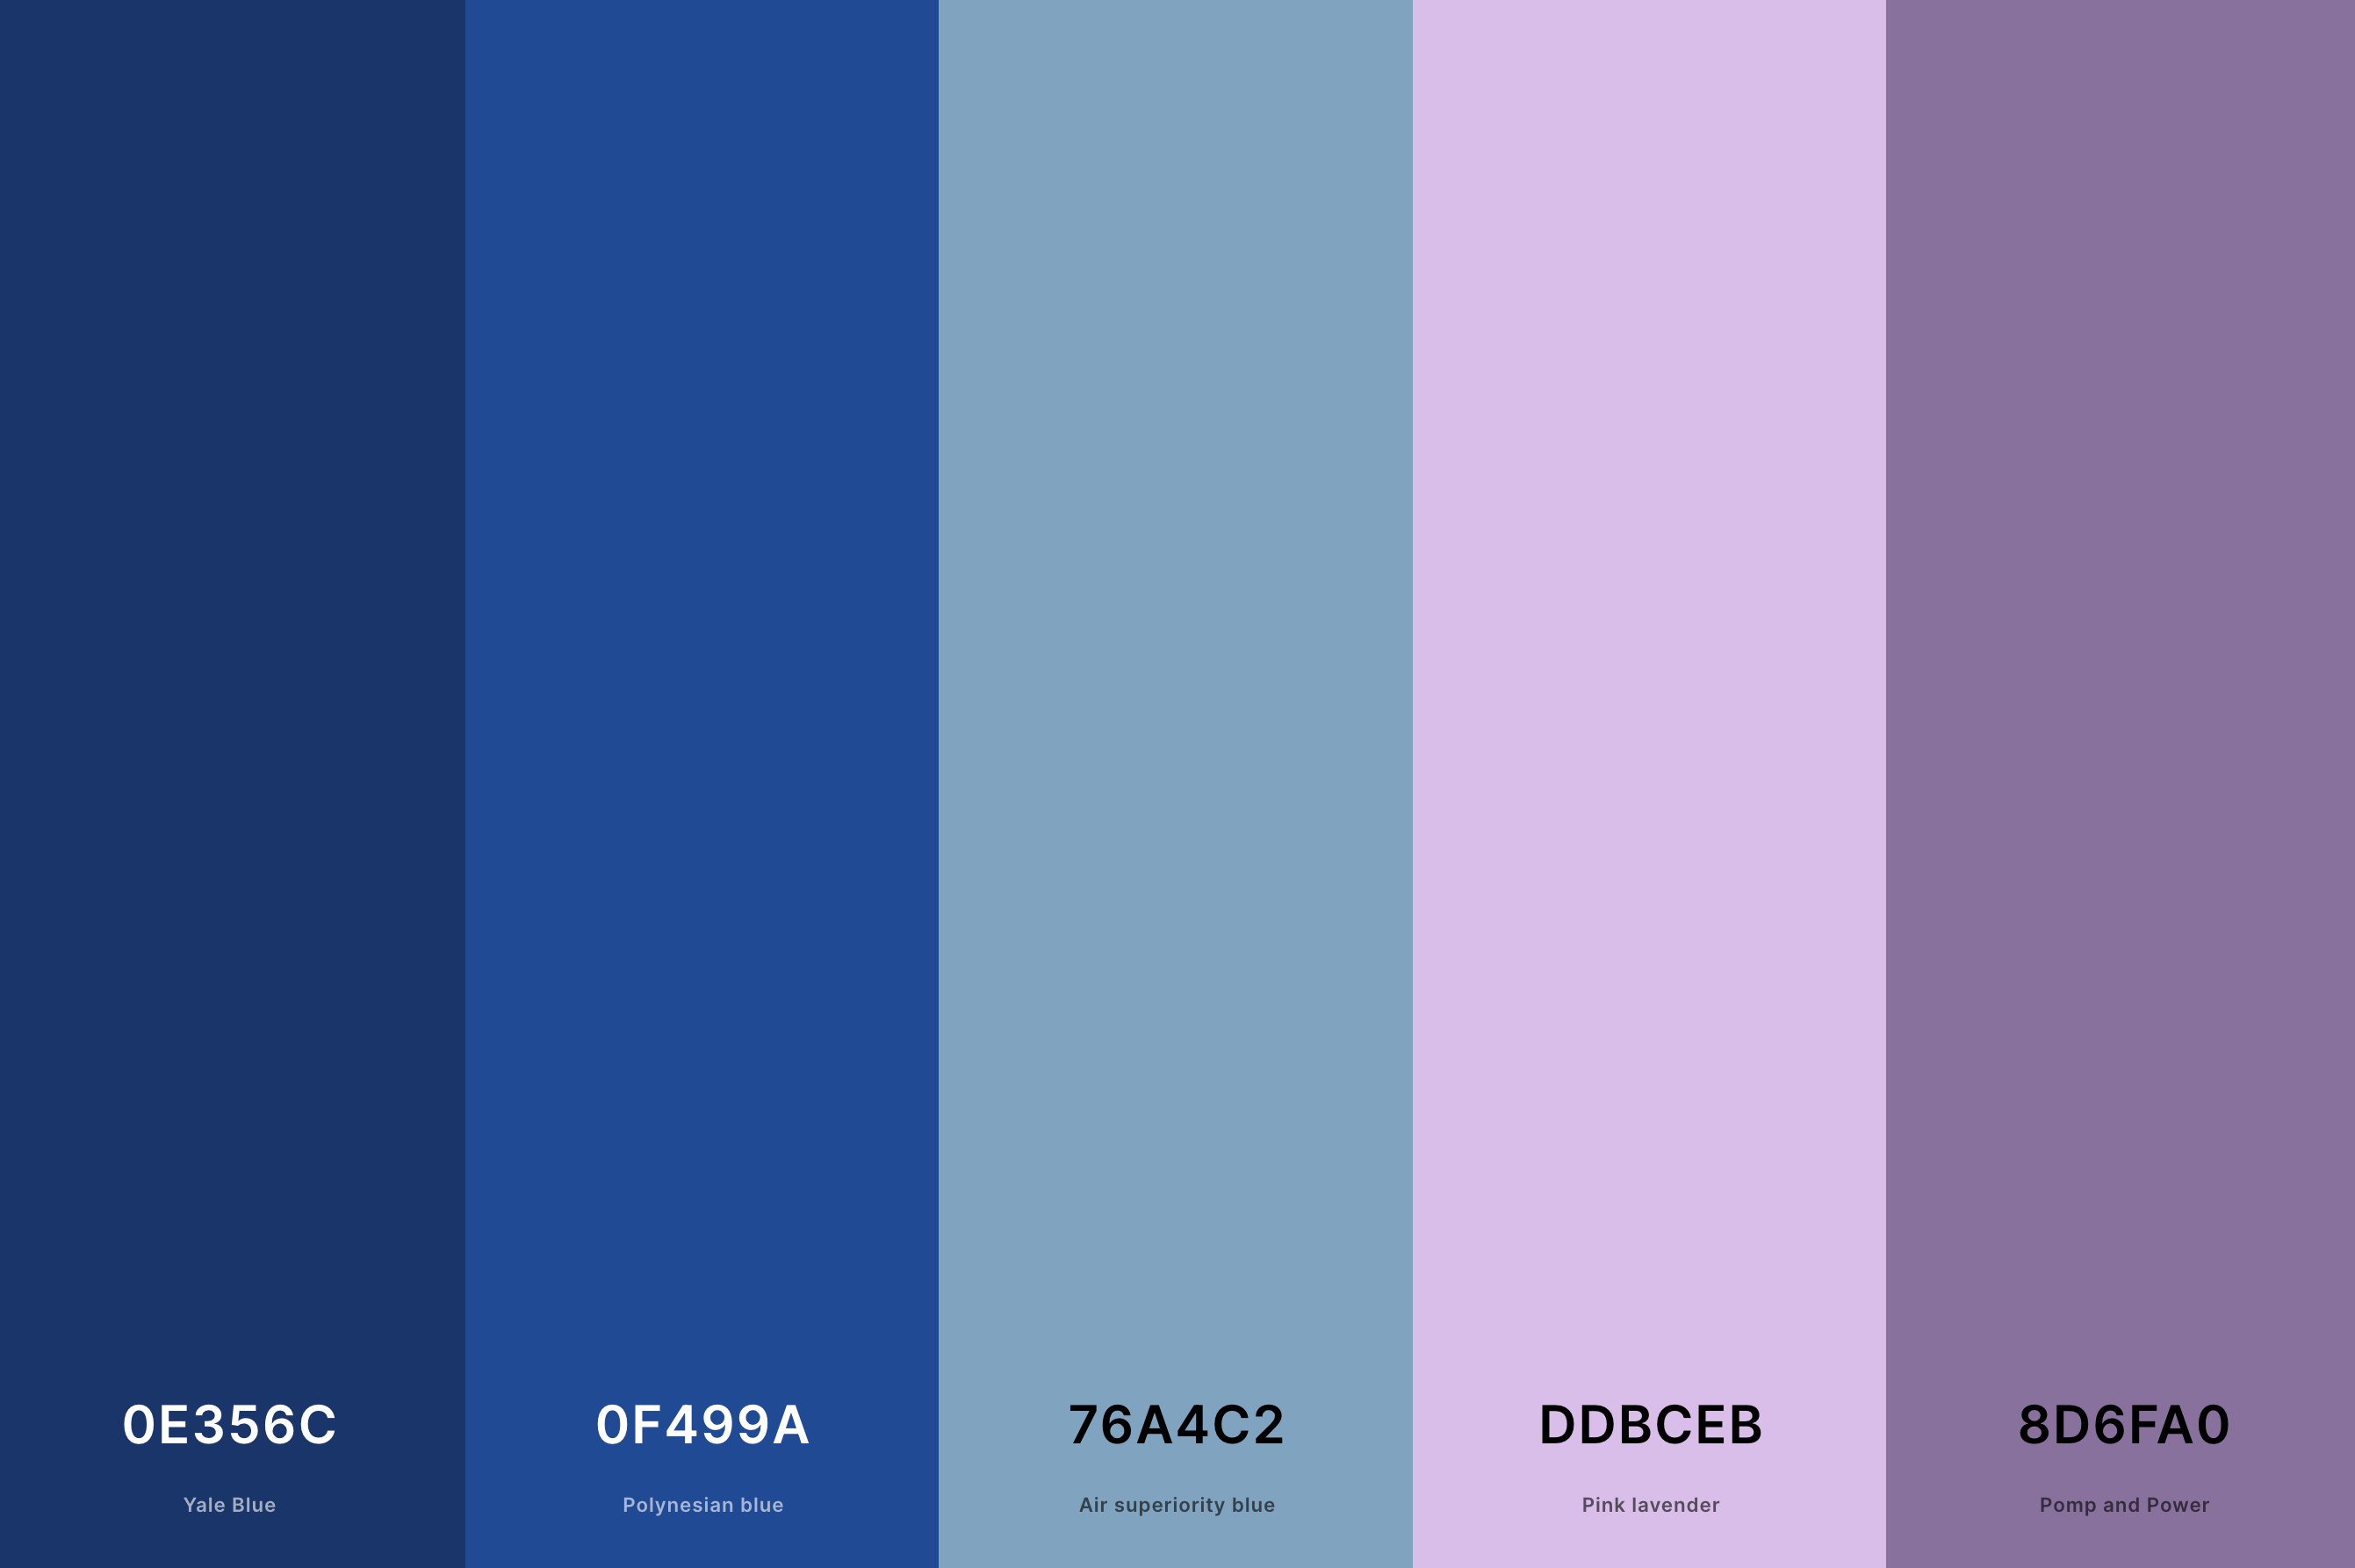 15. Cobalt Blue And Lavender Color Palette Color Palette with Yale Blue (Hex #0E356C) + Polynesian Blue (Hex #0F499A) + Air Superiority Blue (Hex #76A4C2) + Pink Lavender (Hex #DDBCEB) + Pomp And Power (Hex #8D6FA0) Color Palette with Hex Codes